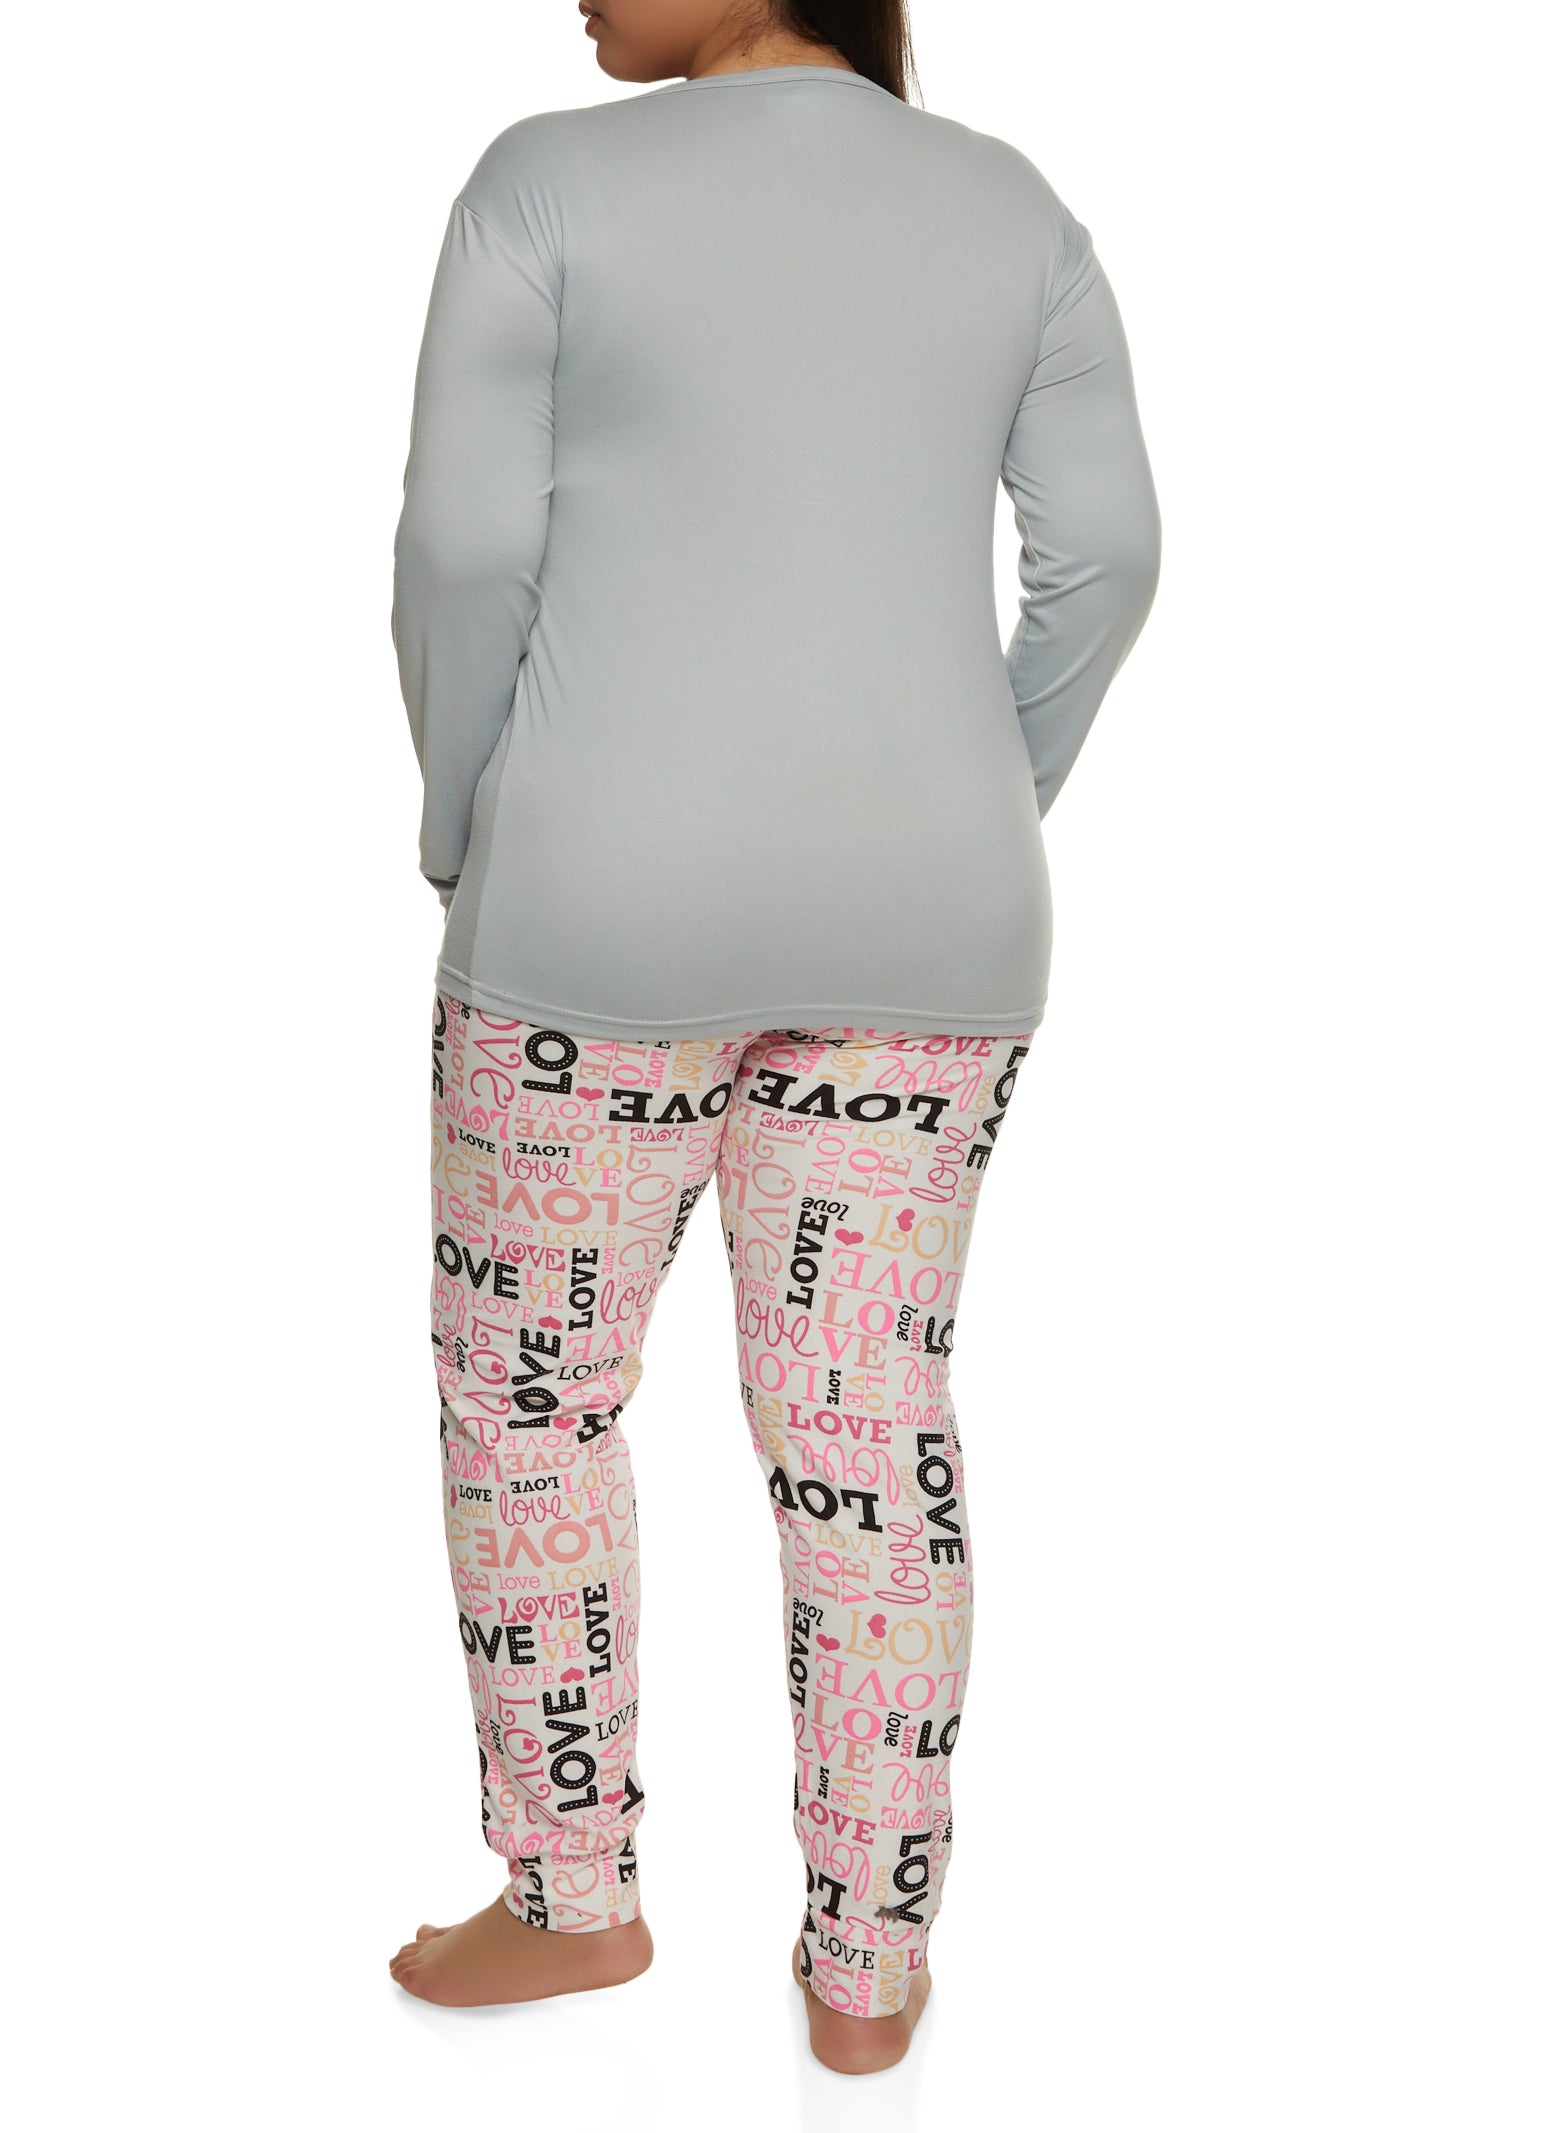 Rainbow Shops Womens Plus Size Under the Stars Pajama Top and Printed Lounge  Pants, Pink, Size 3X